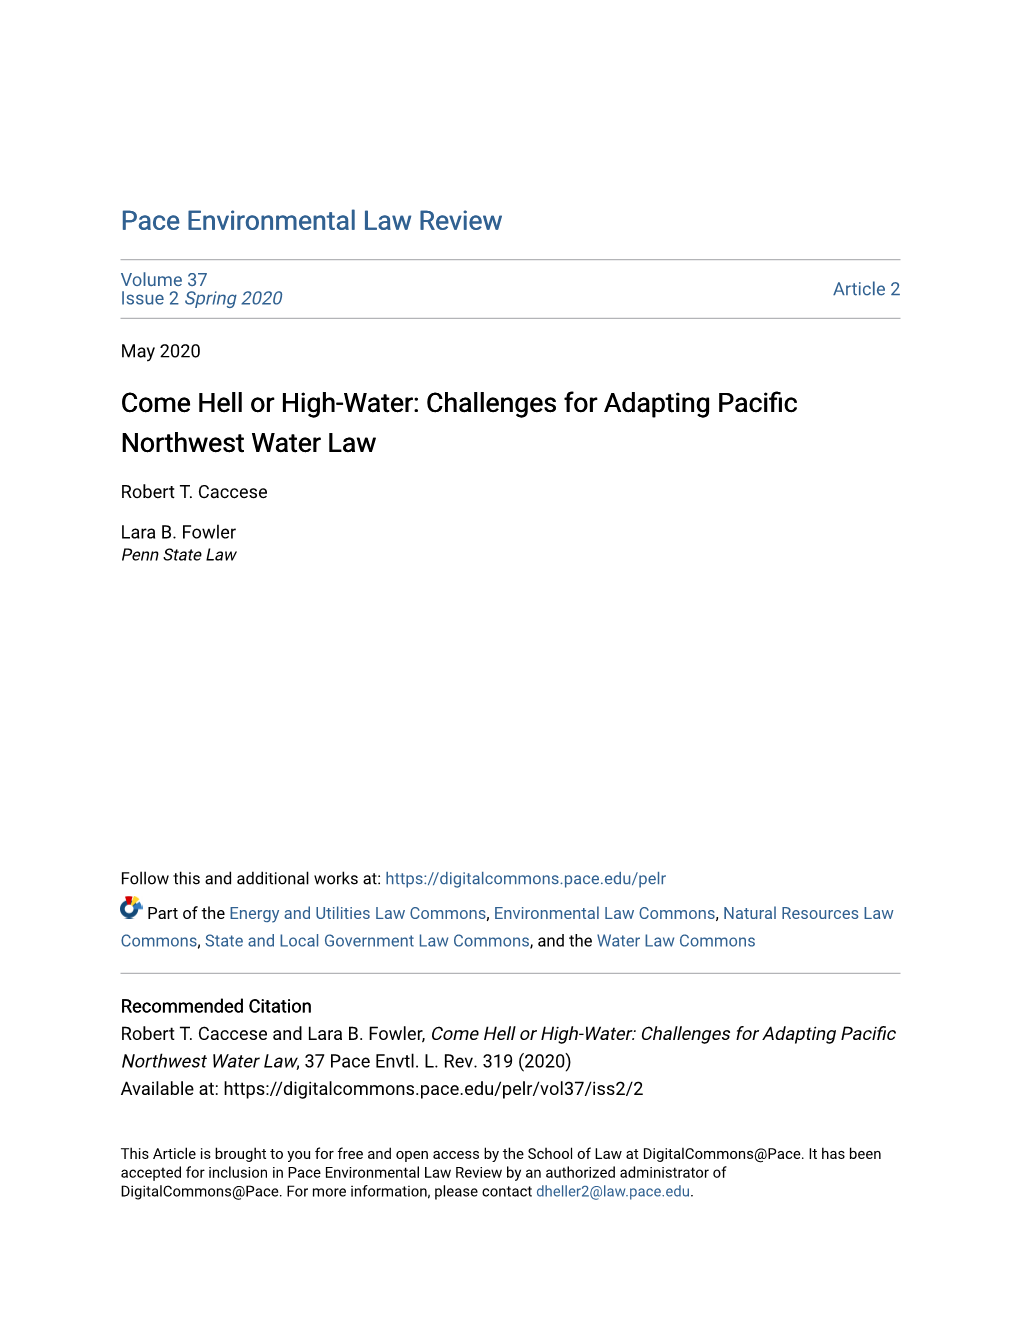 Challenges for Adapting Pacific Northwest Water Law